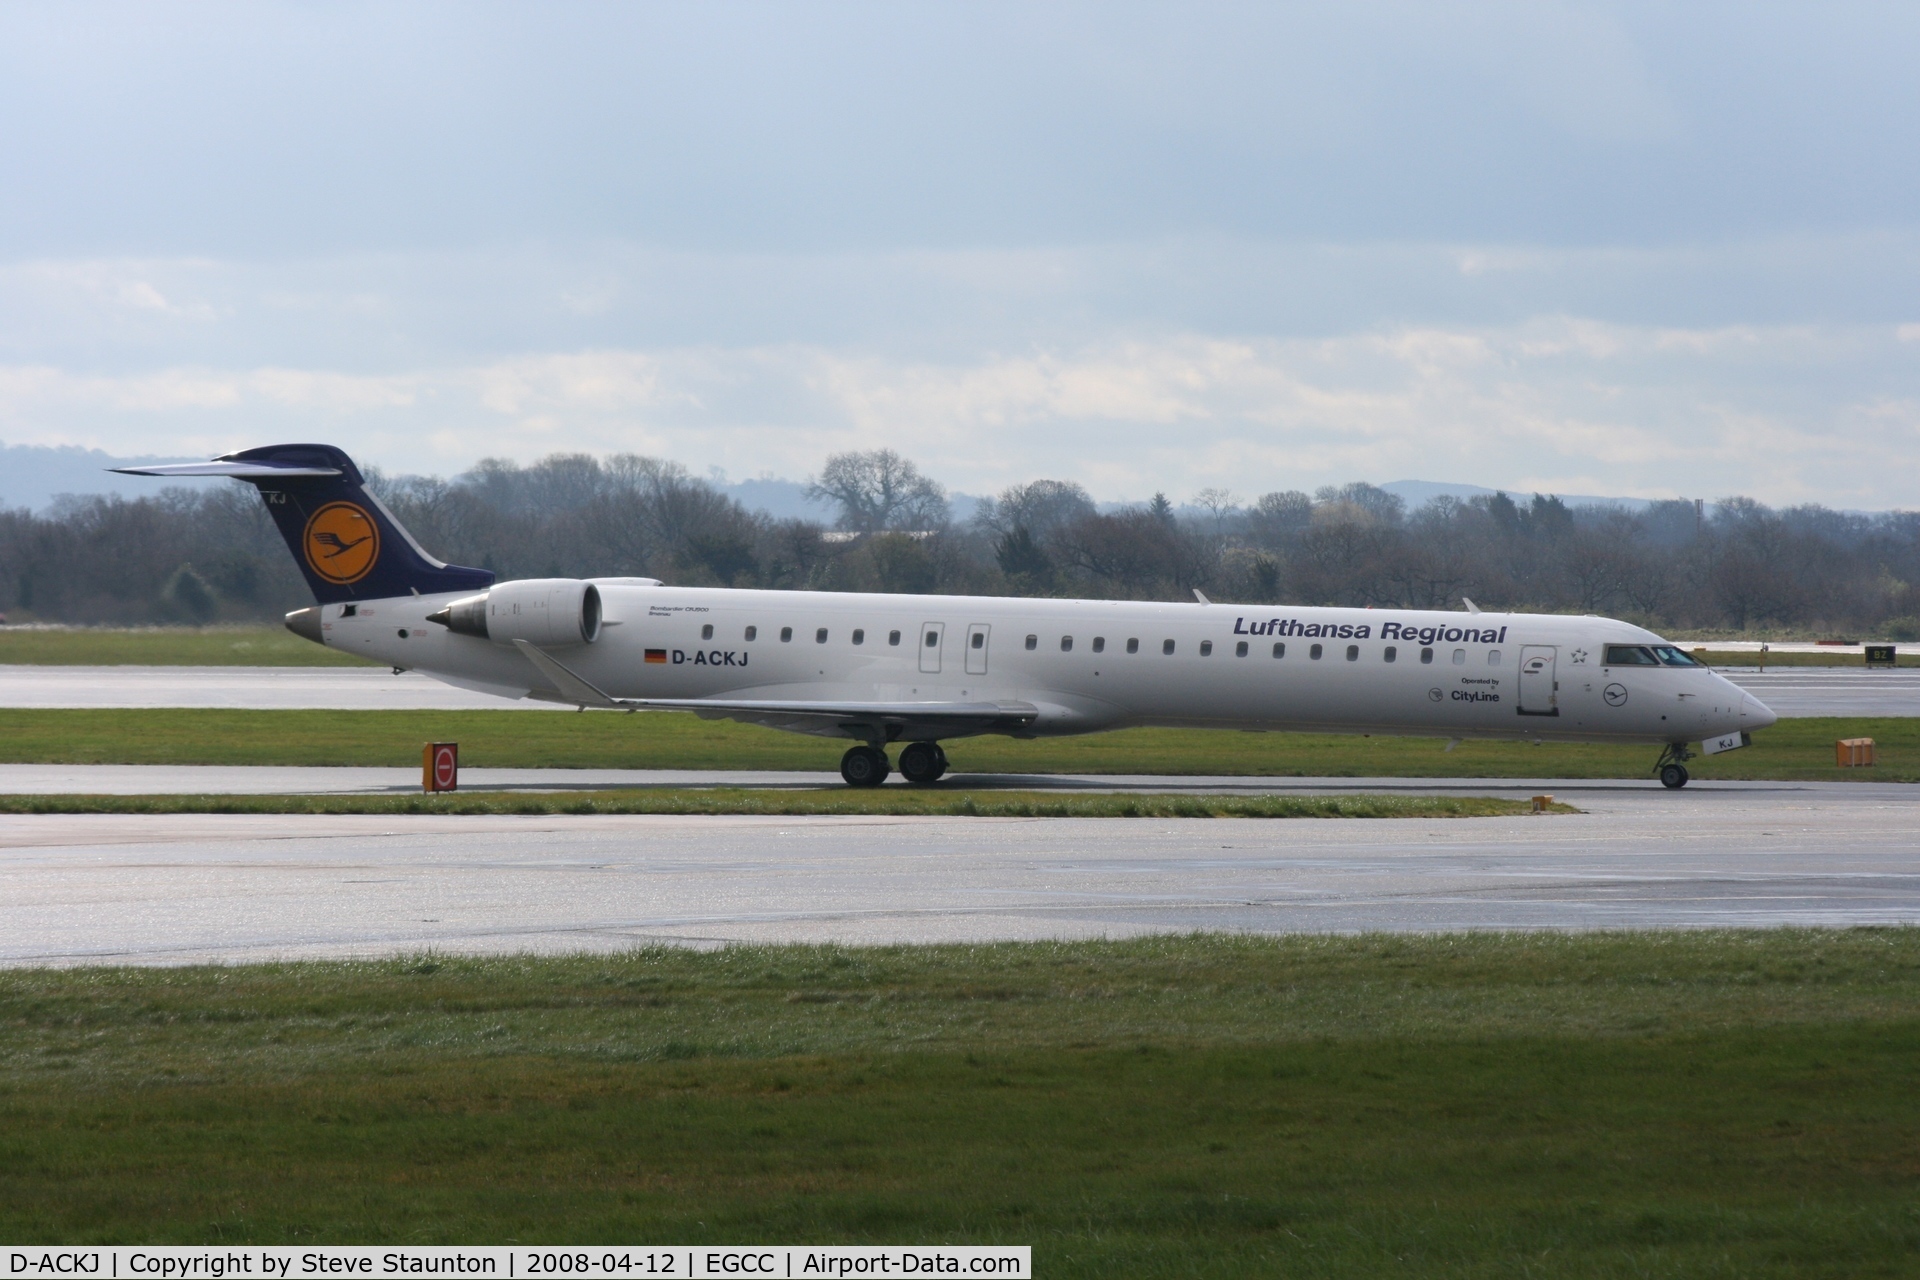 D-ACKJ, 2006 Bombardier CRJ-900LR (CL-600-2D24) C/N 15089, Taken at Manchester Airport on a typical showery April day